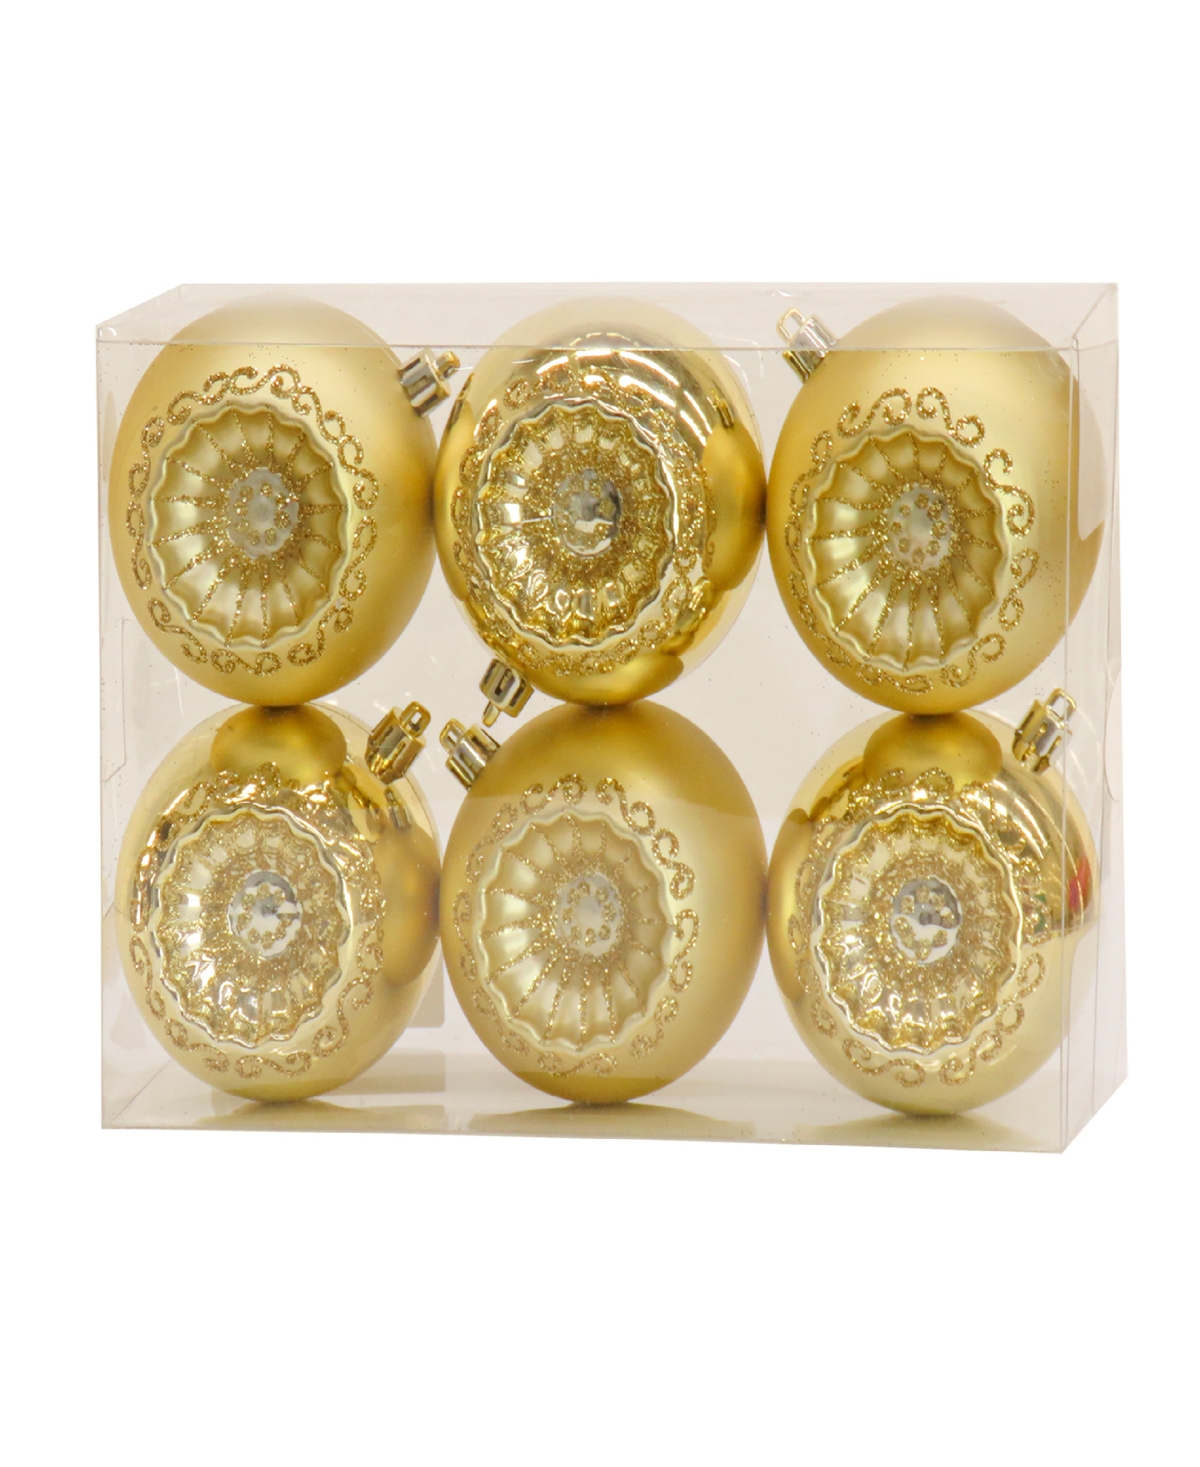 National Tree Company First Traditions 6 Piece Shatterproof Glittering Ornaments In Gold